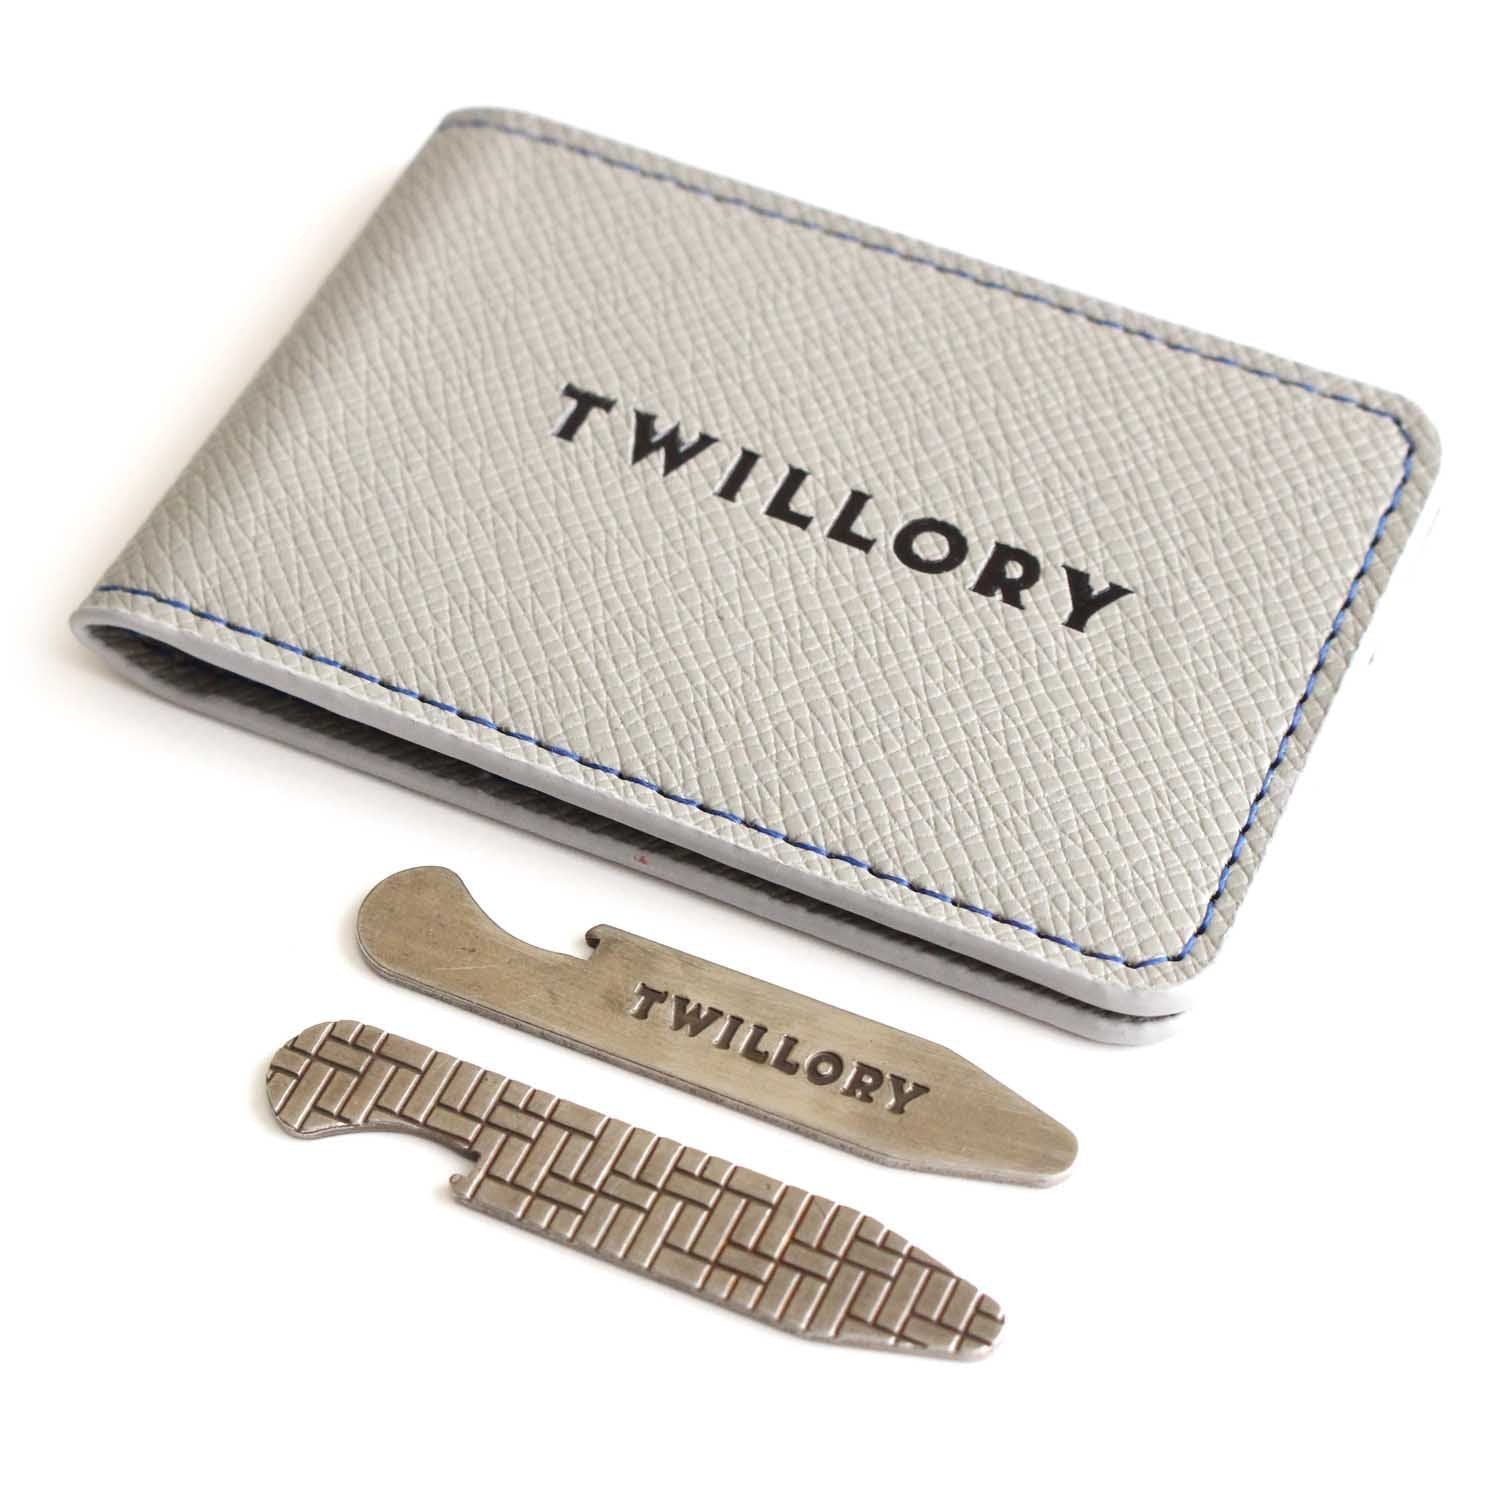 Everything You Need to Know About Collar Stays - The GentleManual